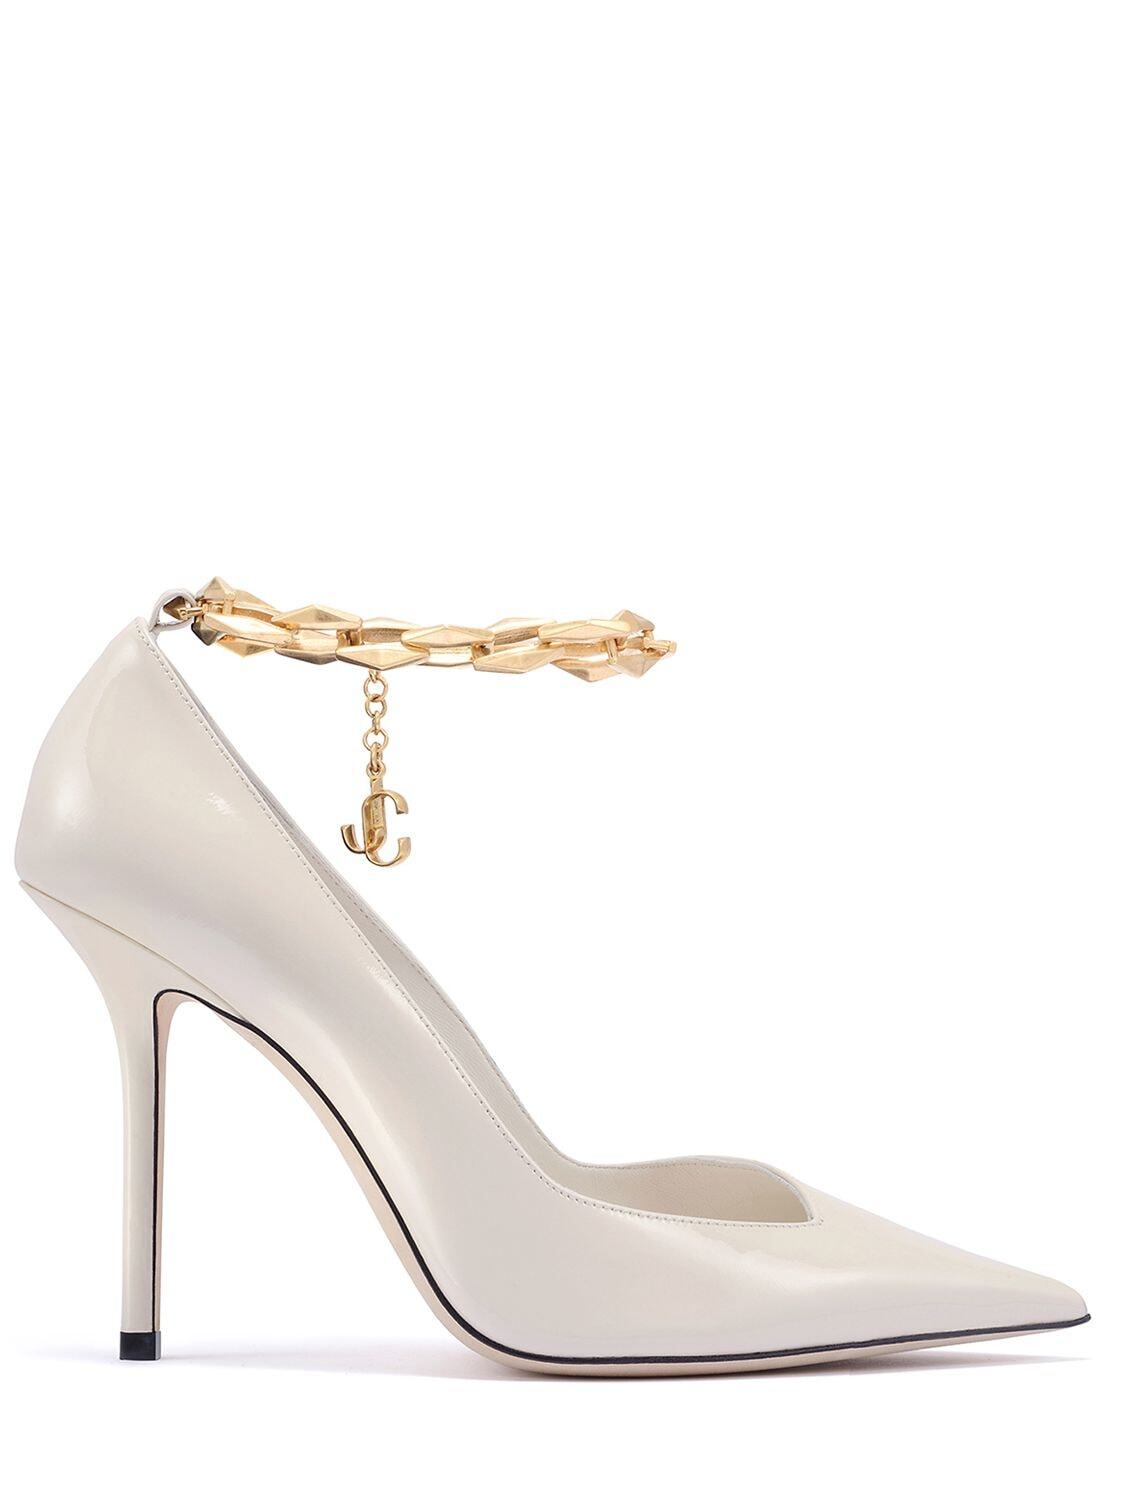 JIMMY CHOO 100mm Talura Patent Leather Pumps in white